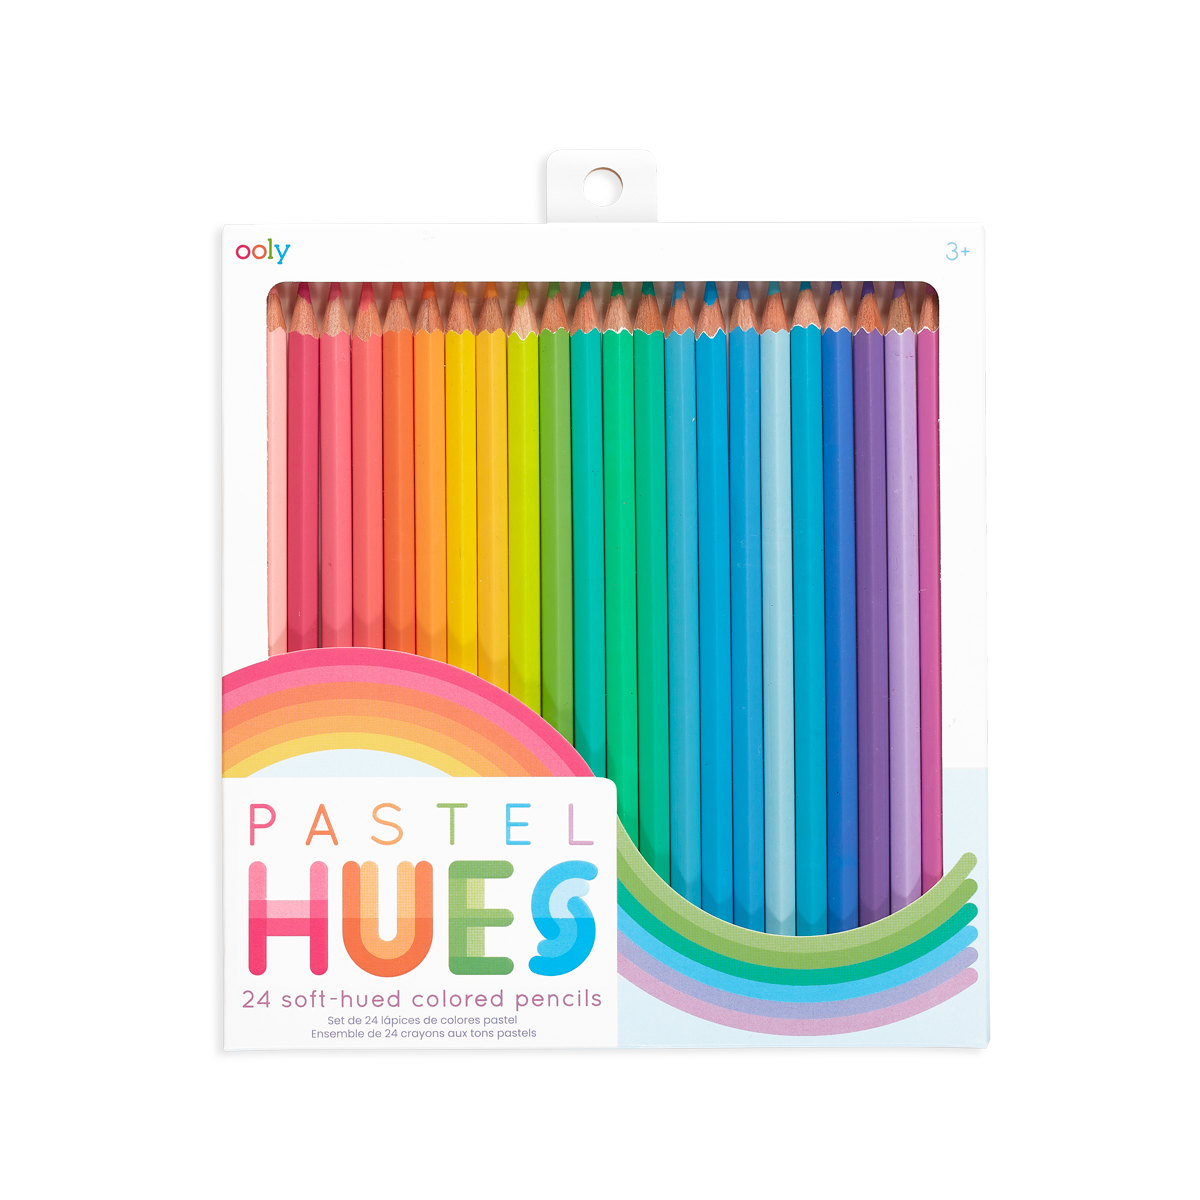 OOLY Pastel Hues colored pencils set of 24 in packaging